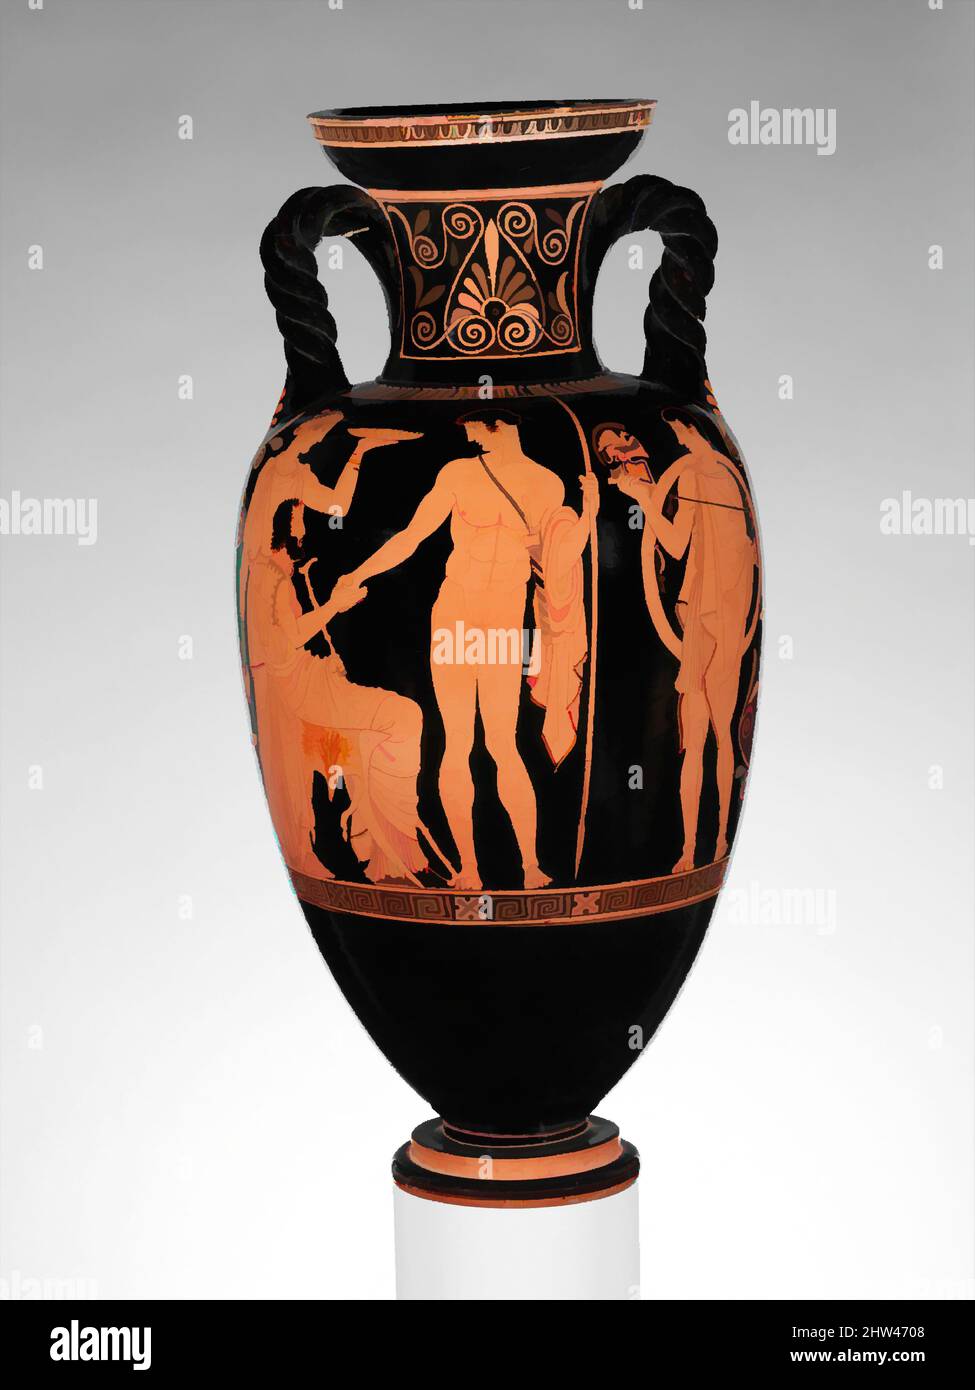 Art inspired by Terracotta neck-amphora (jar) with twisted handles, Classical, ca. 440 B.C., Greek, Attic, Terracotta; red-figure, H. 24 1/8 in. (61.3 cm), Vases, Obverse, Neoptolemos departing, Reverse, man and two women. The magnificent decoration here depicts the departure of a, Classic works modernized by Artotop with a splash of modernity. Shapes, color and value, eye-catching visual impact on art. Emotions through freedom of artworks in a contemporary way. A timeless message pursuing a wildly creative new direction. Artists turning to the digital medium and creating the Artotop NFT Stock Photo